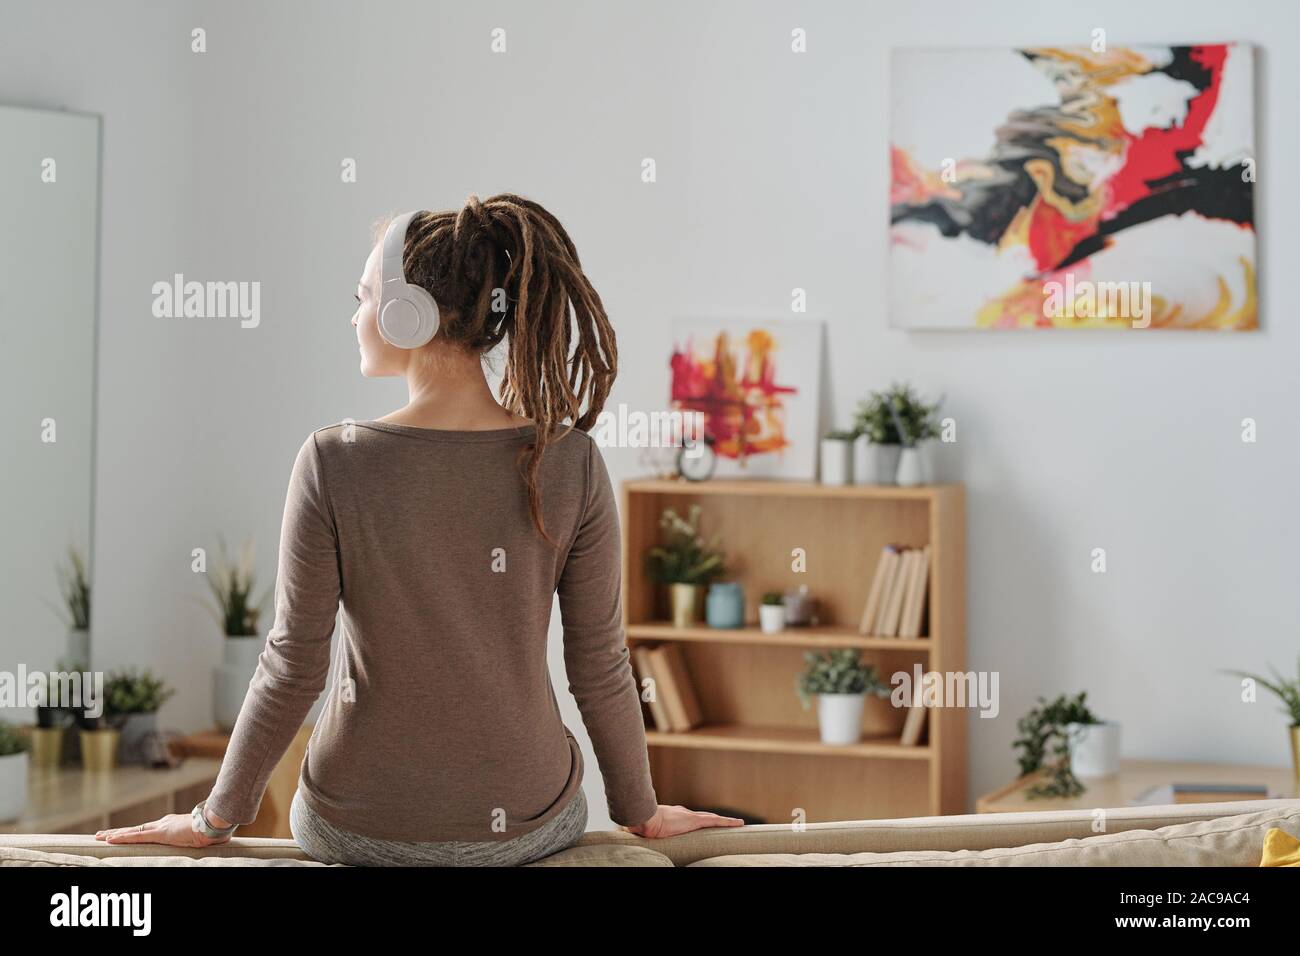 Back view of restful girl with dreadlocks sitting on sofa and listening to music Stock Photo